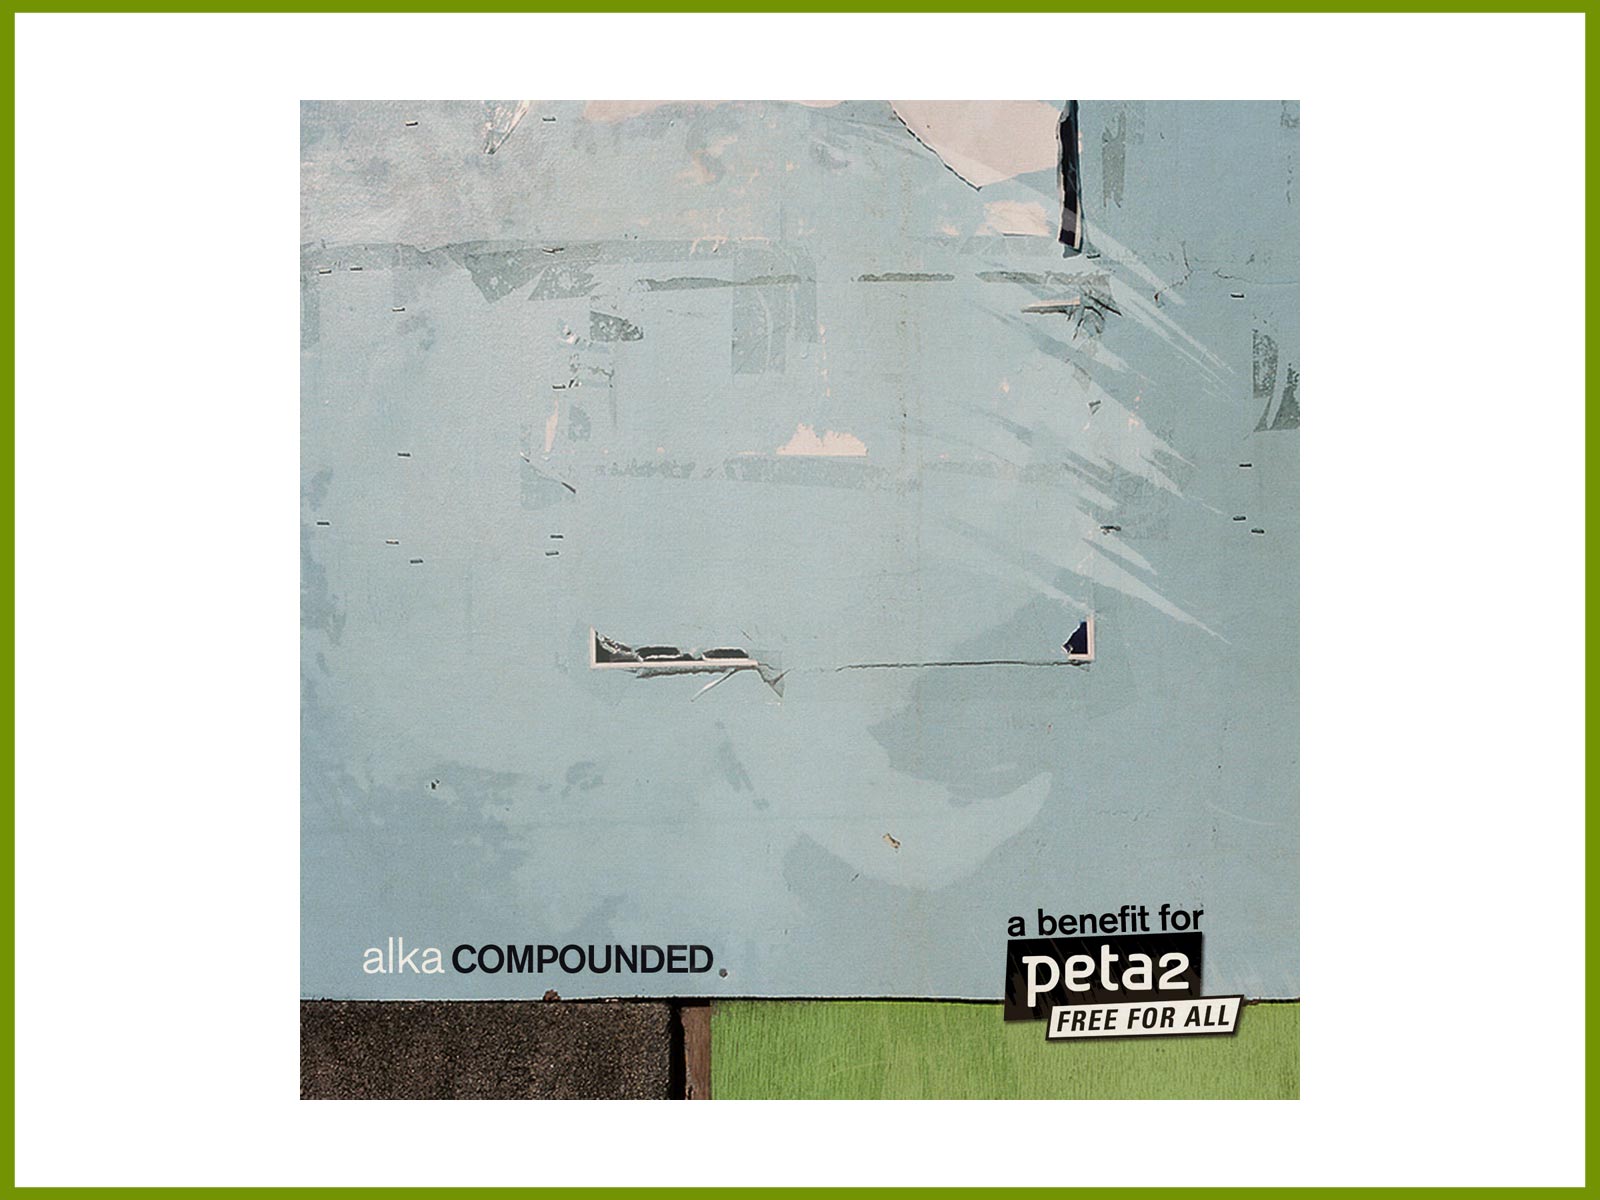 Get the remix by At Work for Alka, on remix album PETA benefit